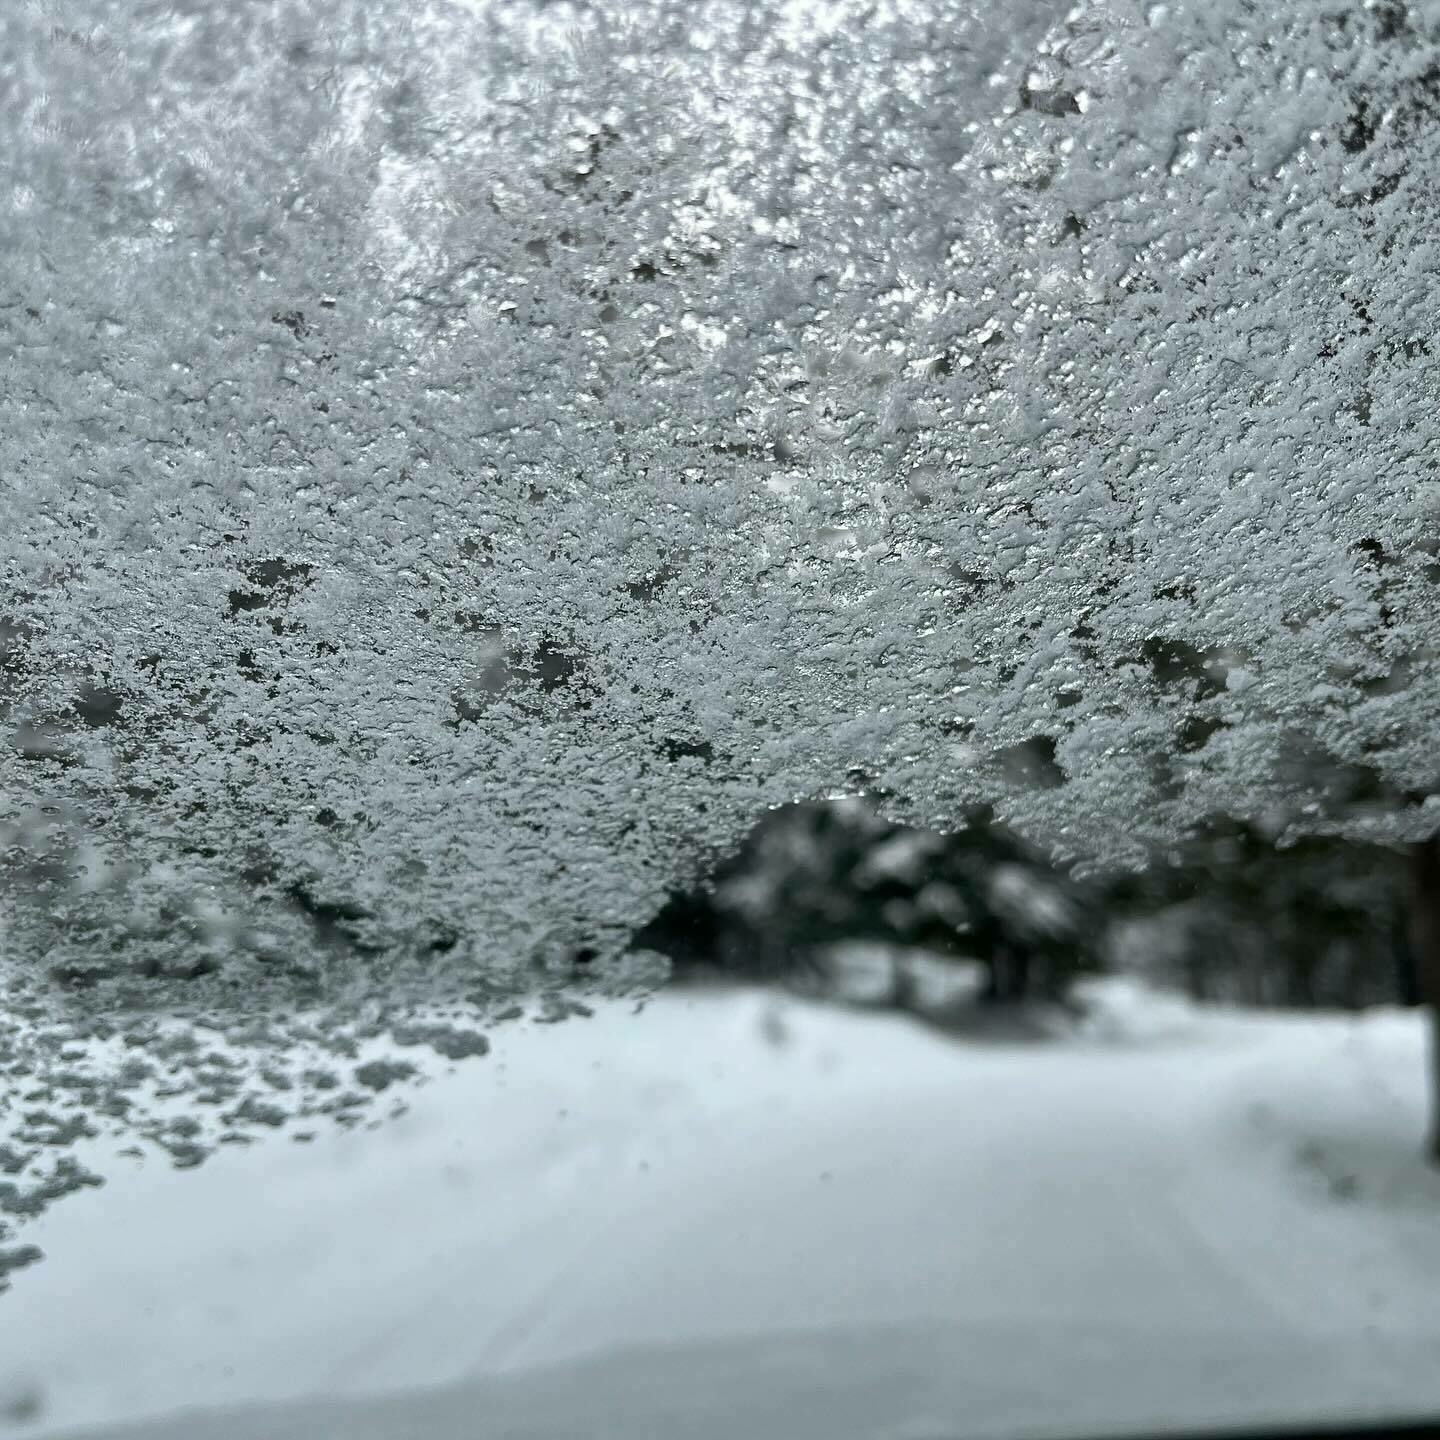 The image shows a frost-covered window partially obscuring the view of a snowy landscape with trees, creating a frosted glass effect.